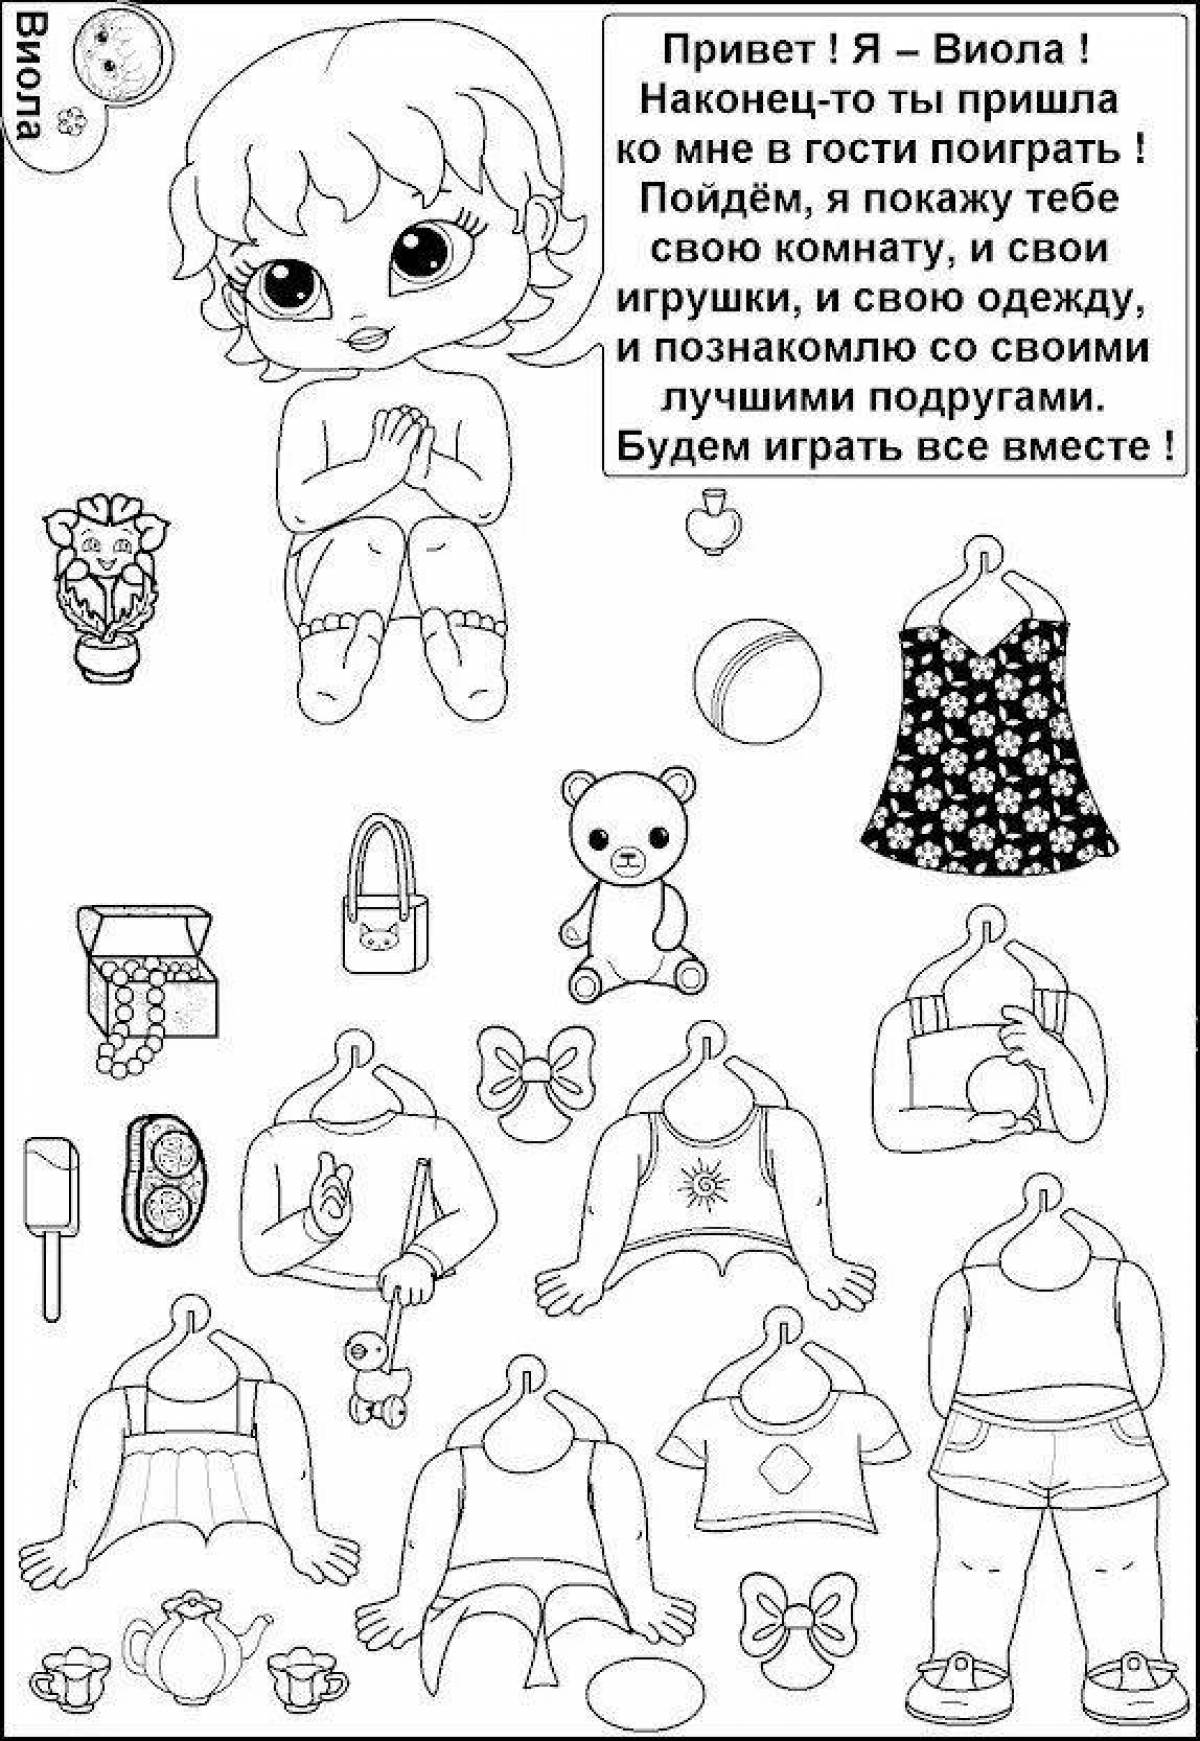 Charming lol doll coloring book with clothes